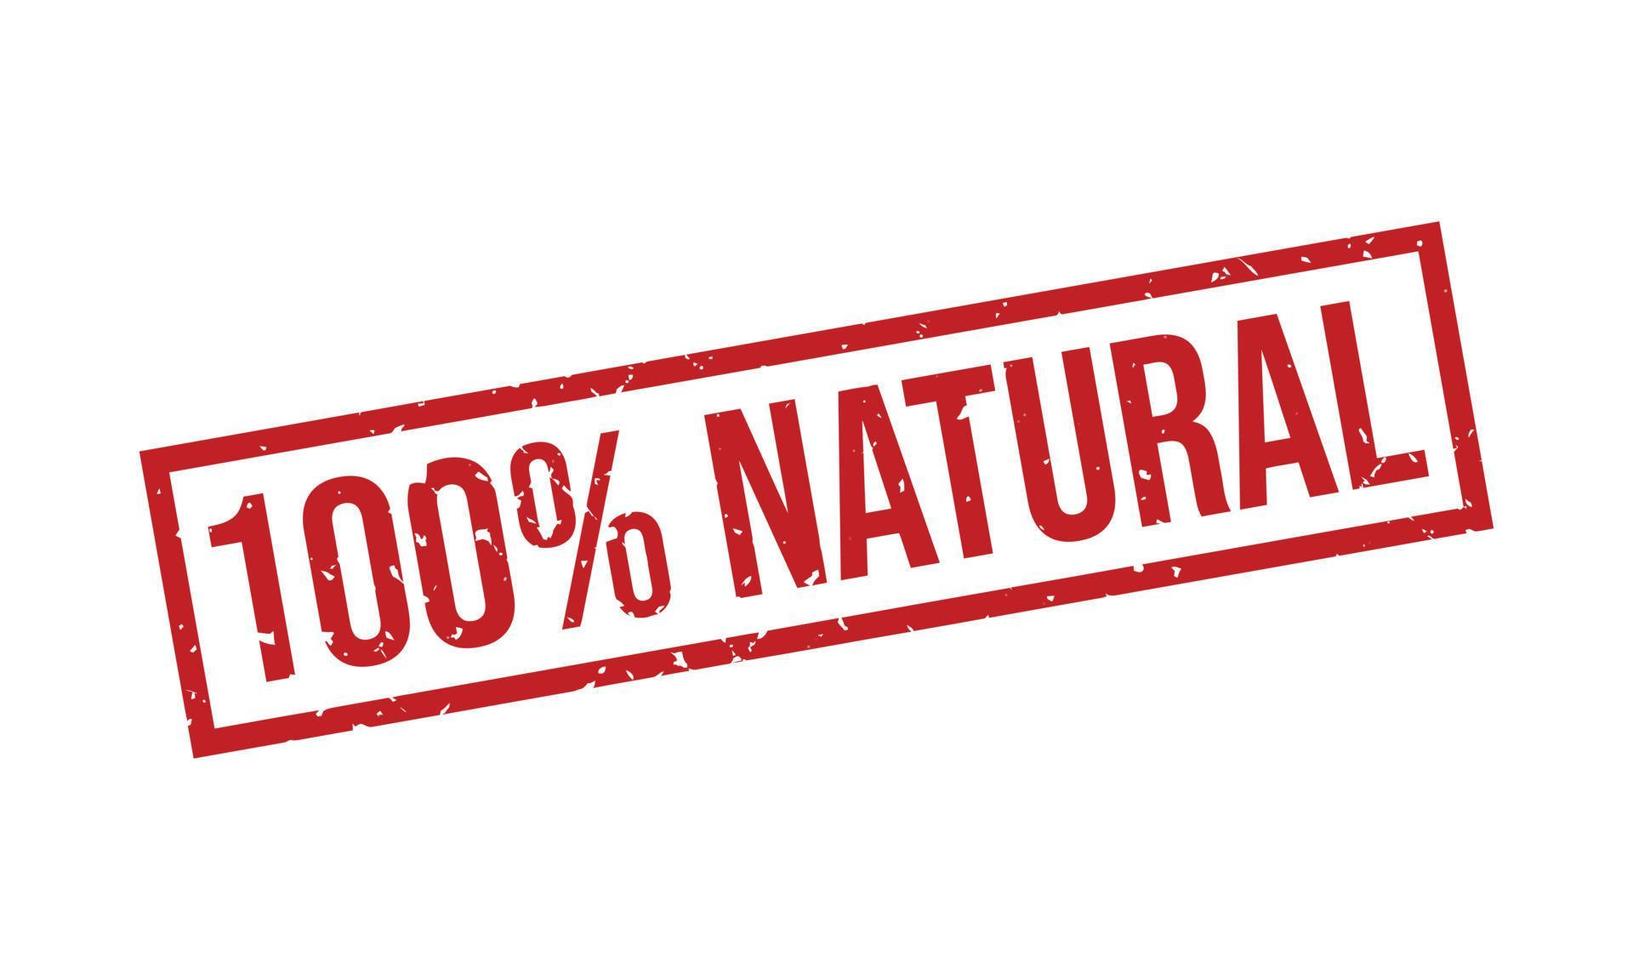 100 Percent Natural Rubber Stamp vector